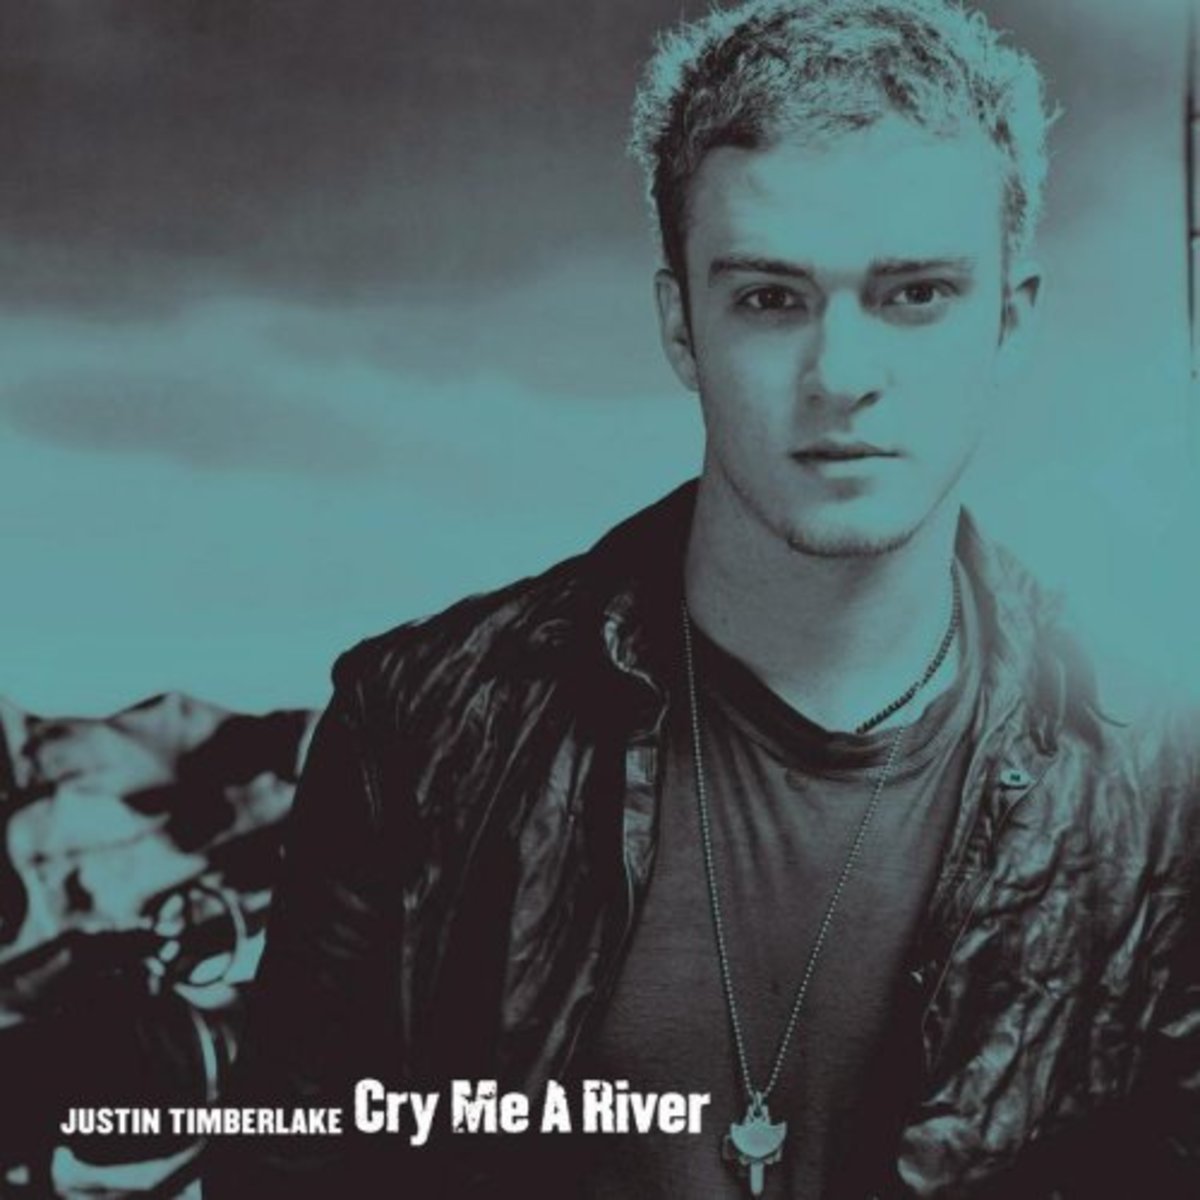 Justin Timberlake, "Cry Me a River"